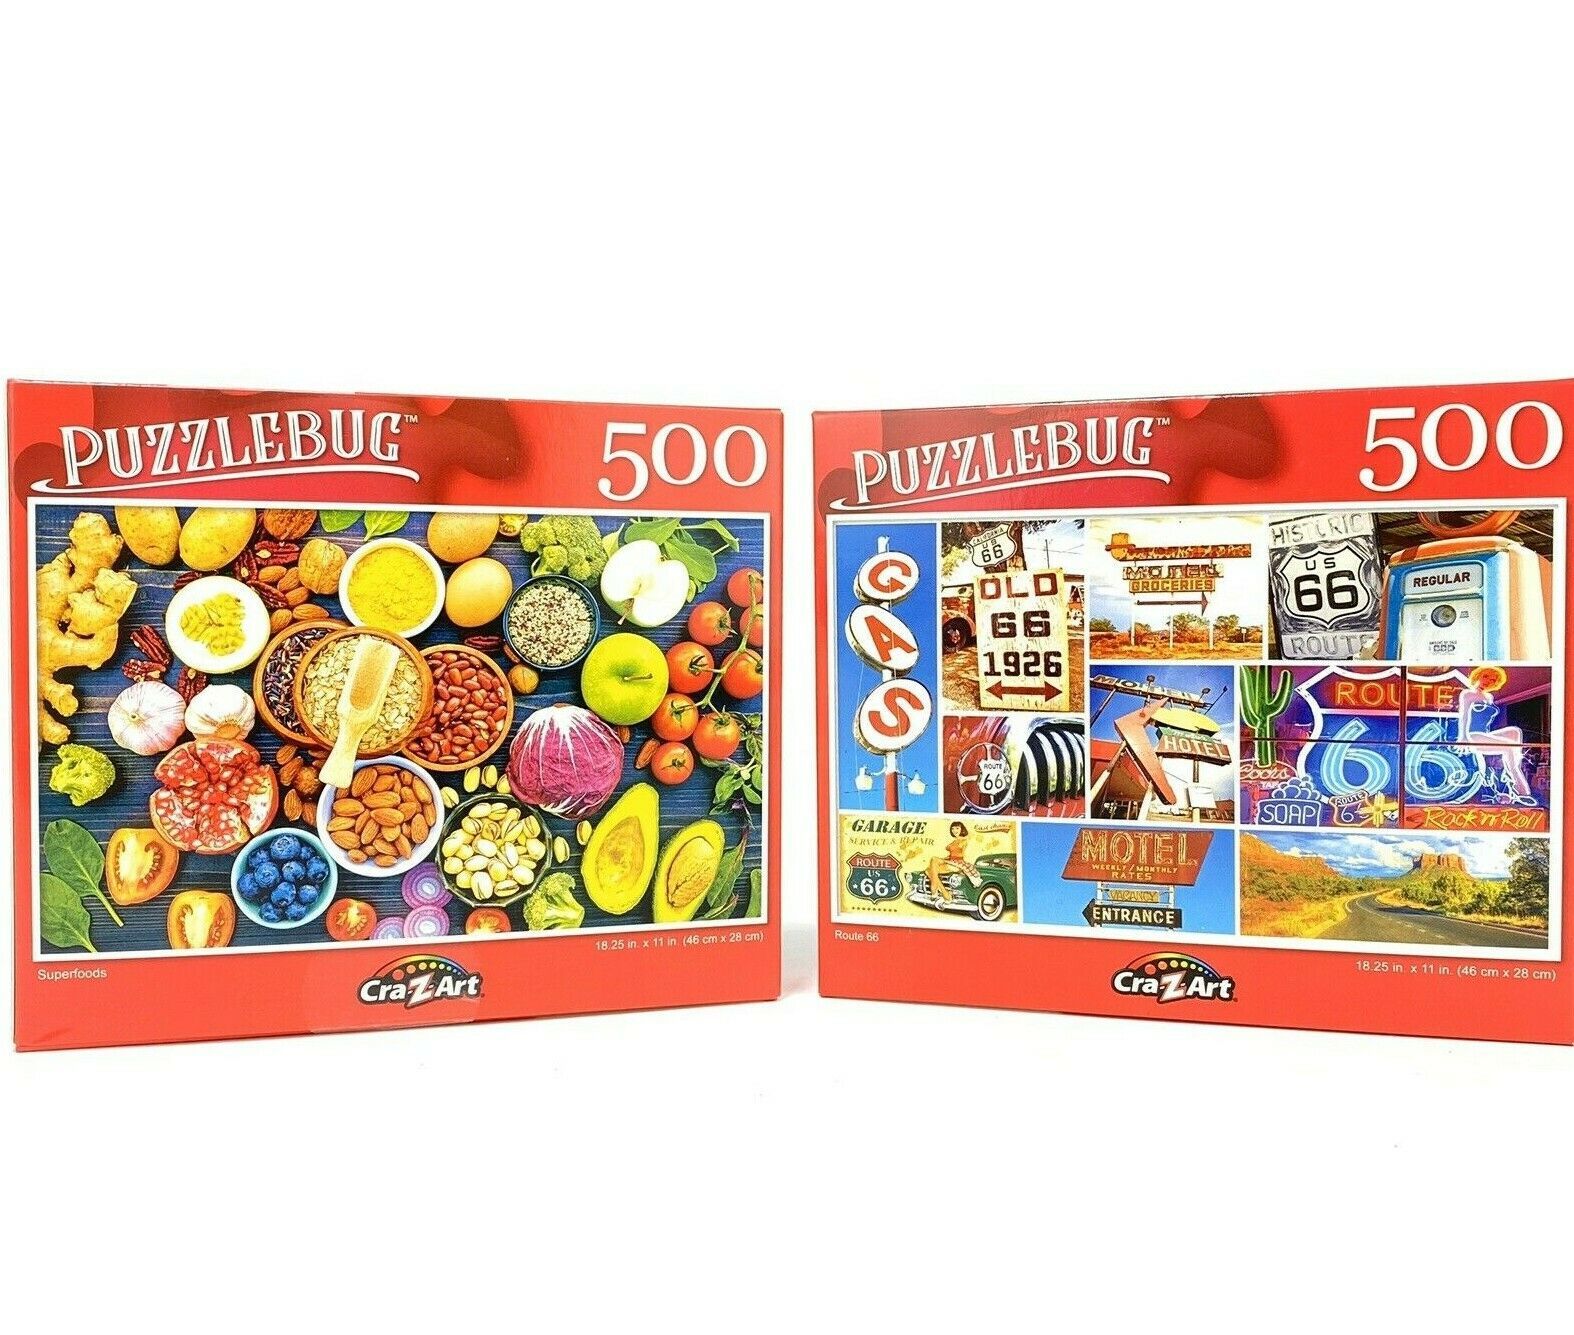 Lot of 2-500 Piece Puzzlebug Jigsaw Puzzles 